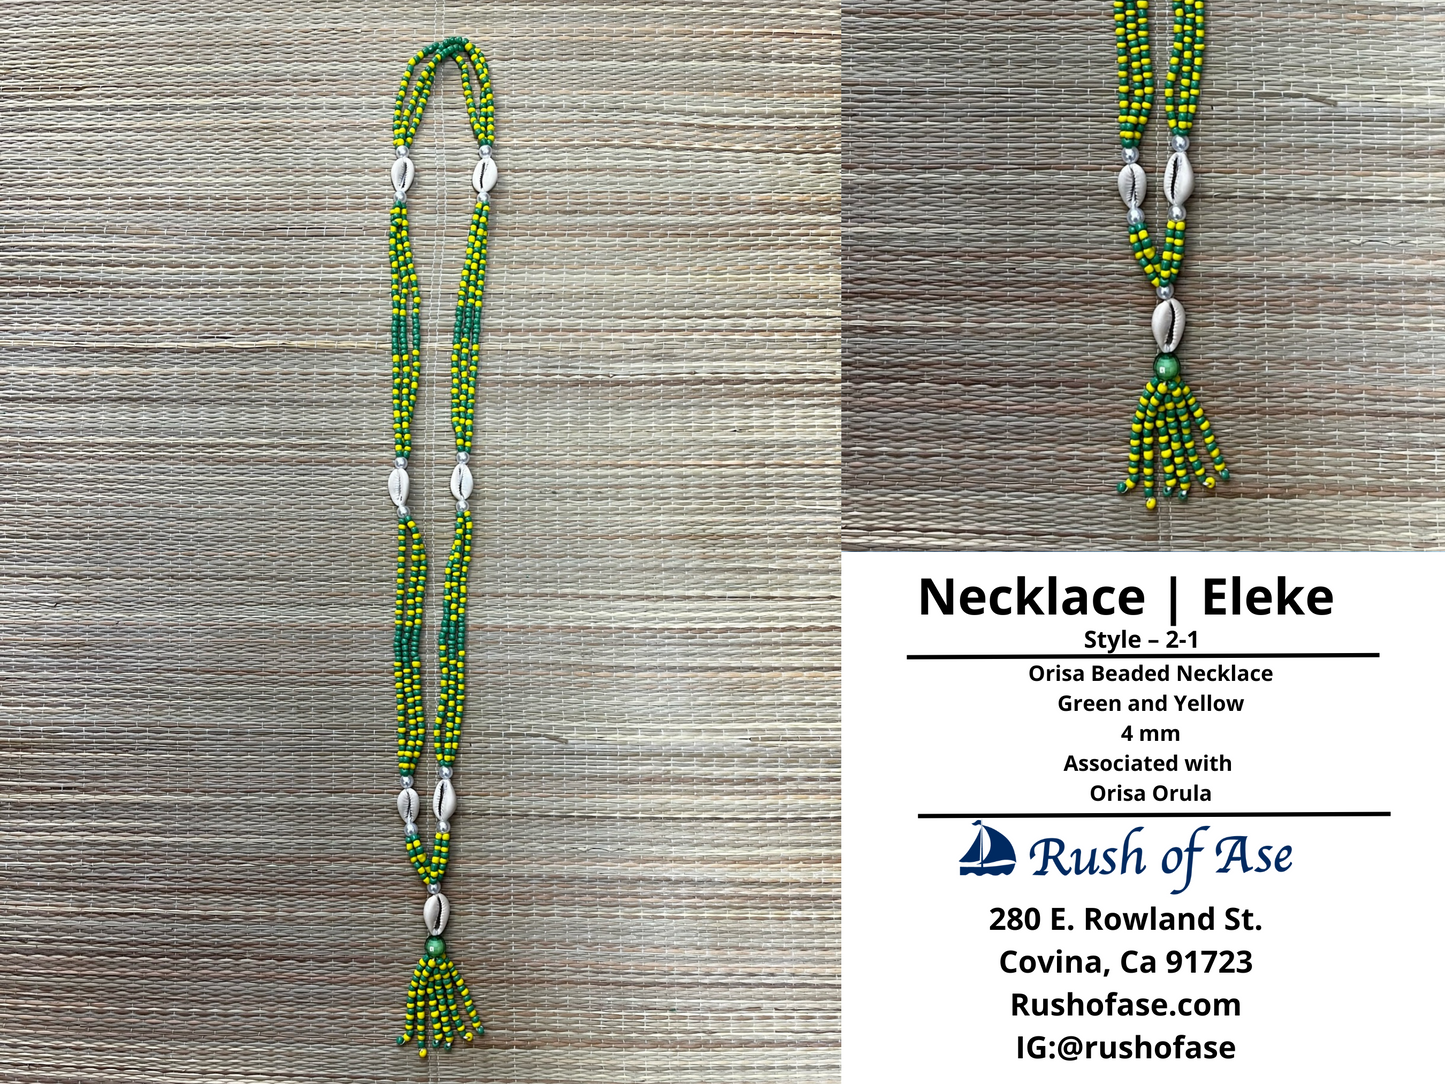 Necklaces | Orisa Multistrand Beaded Necklace with Cowries and Tassel - Green - Yellow - 4mm | Orula – Style 2-1